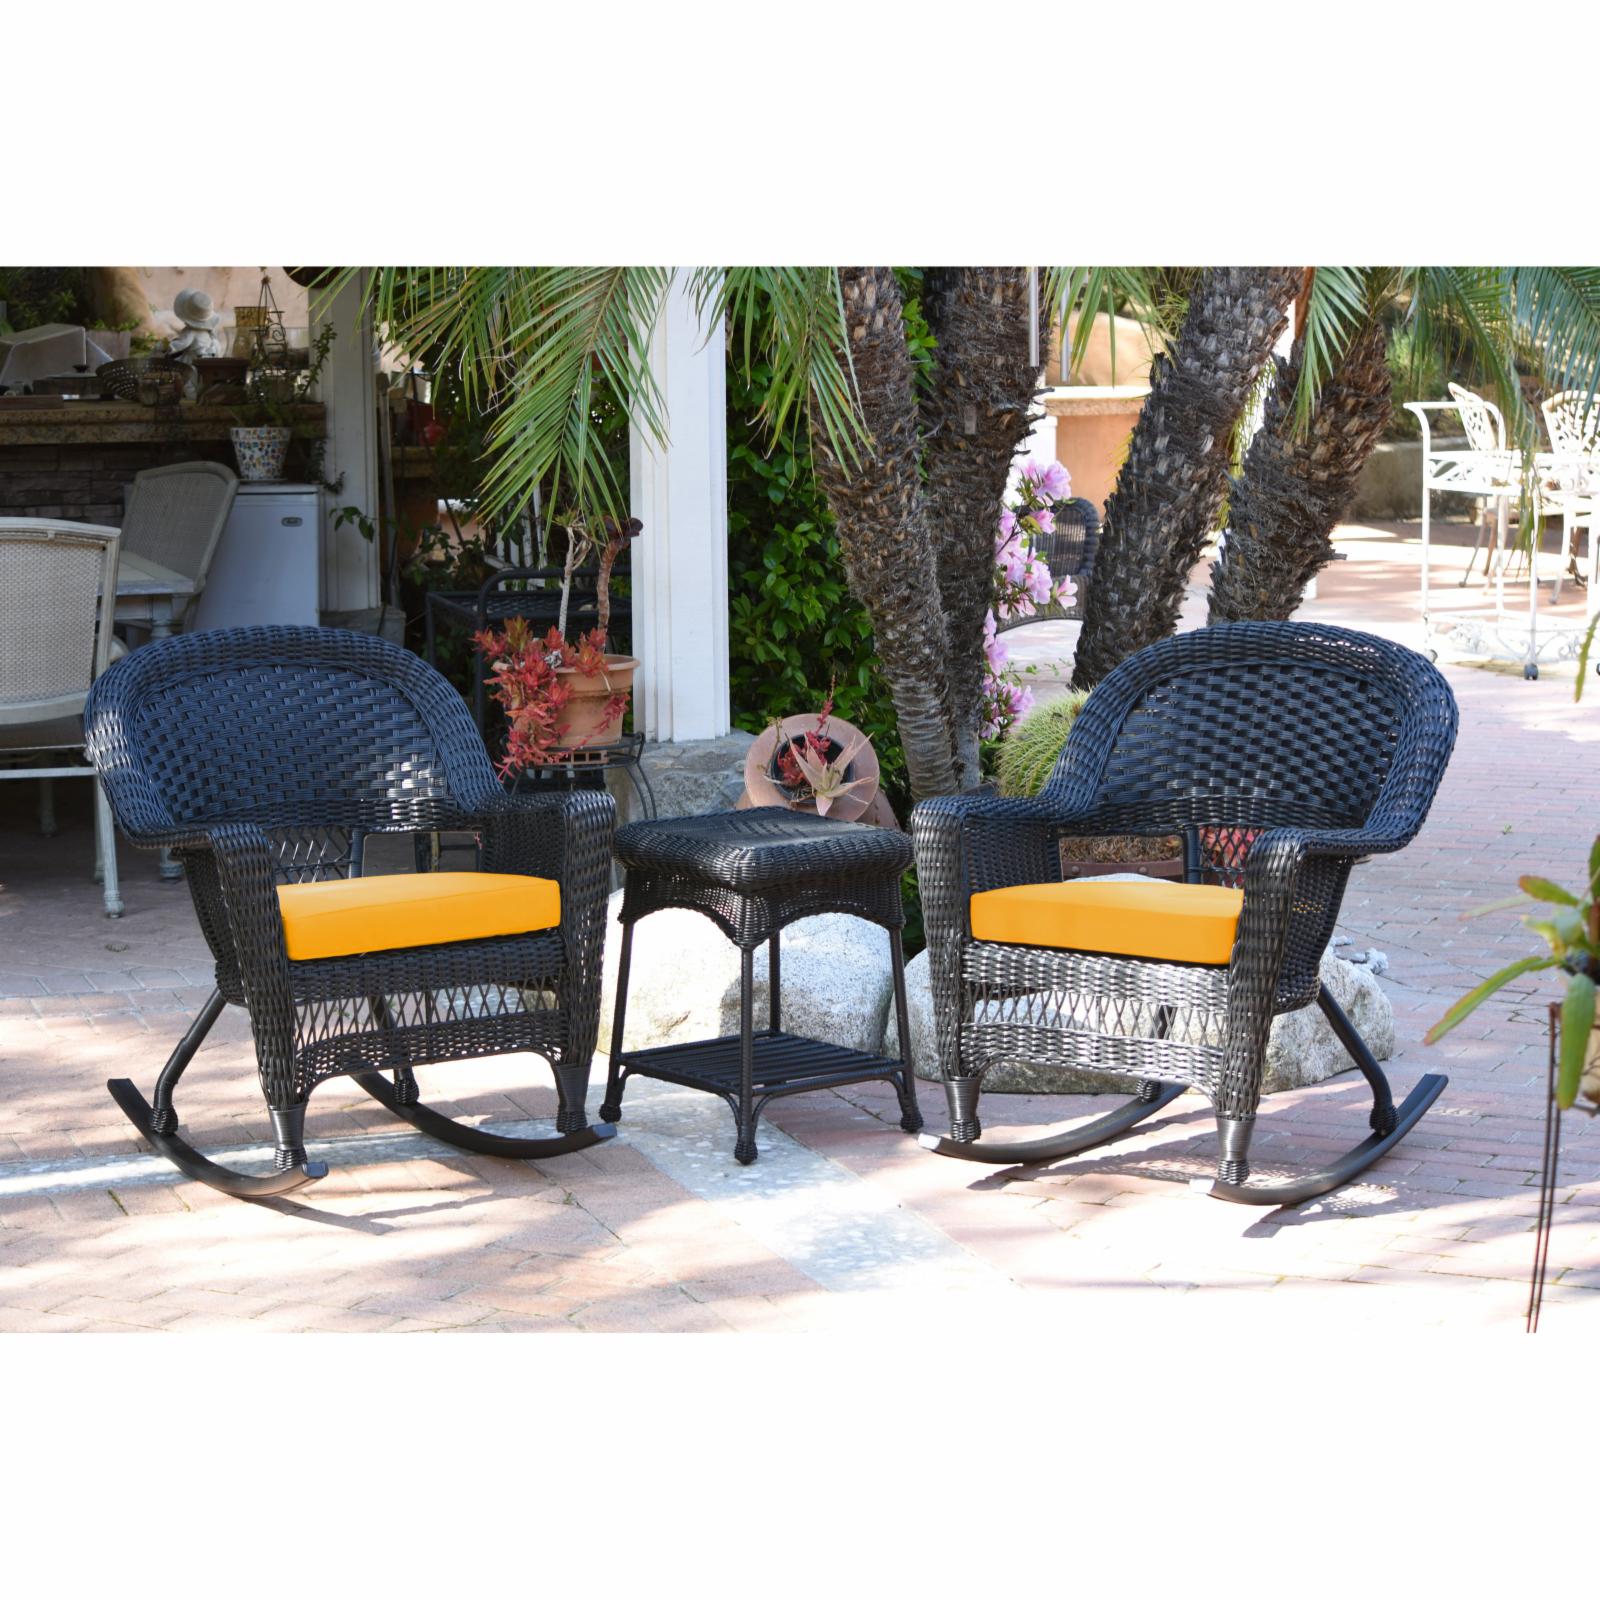 Jeco 3 pc. Wicker Rocker Chair Set with Side Table - image 1 of 2